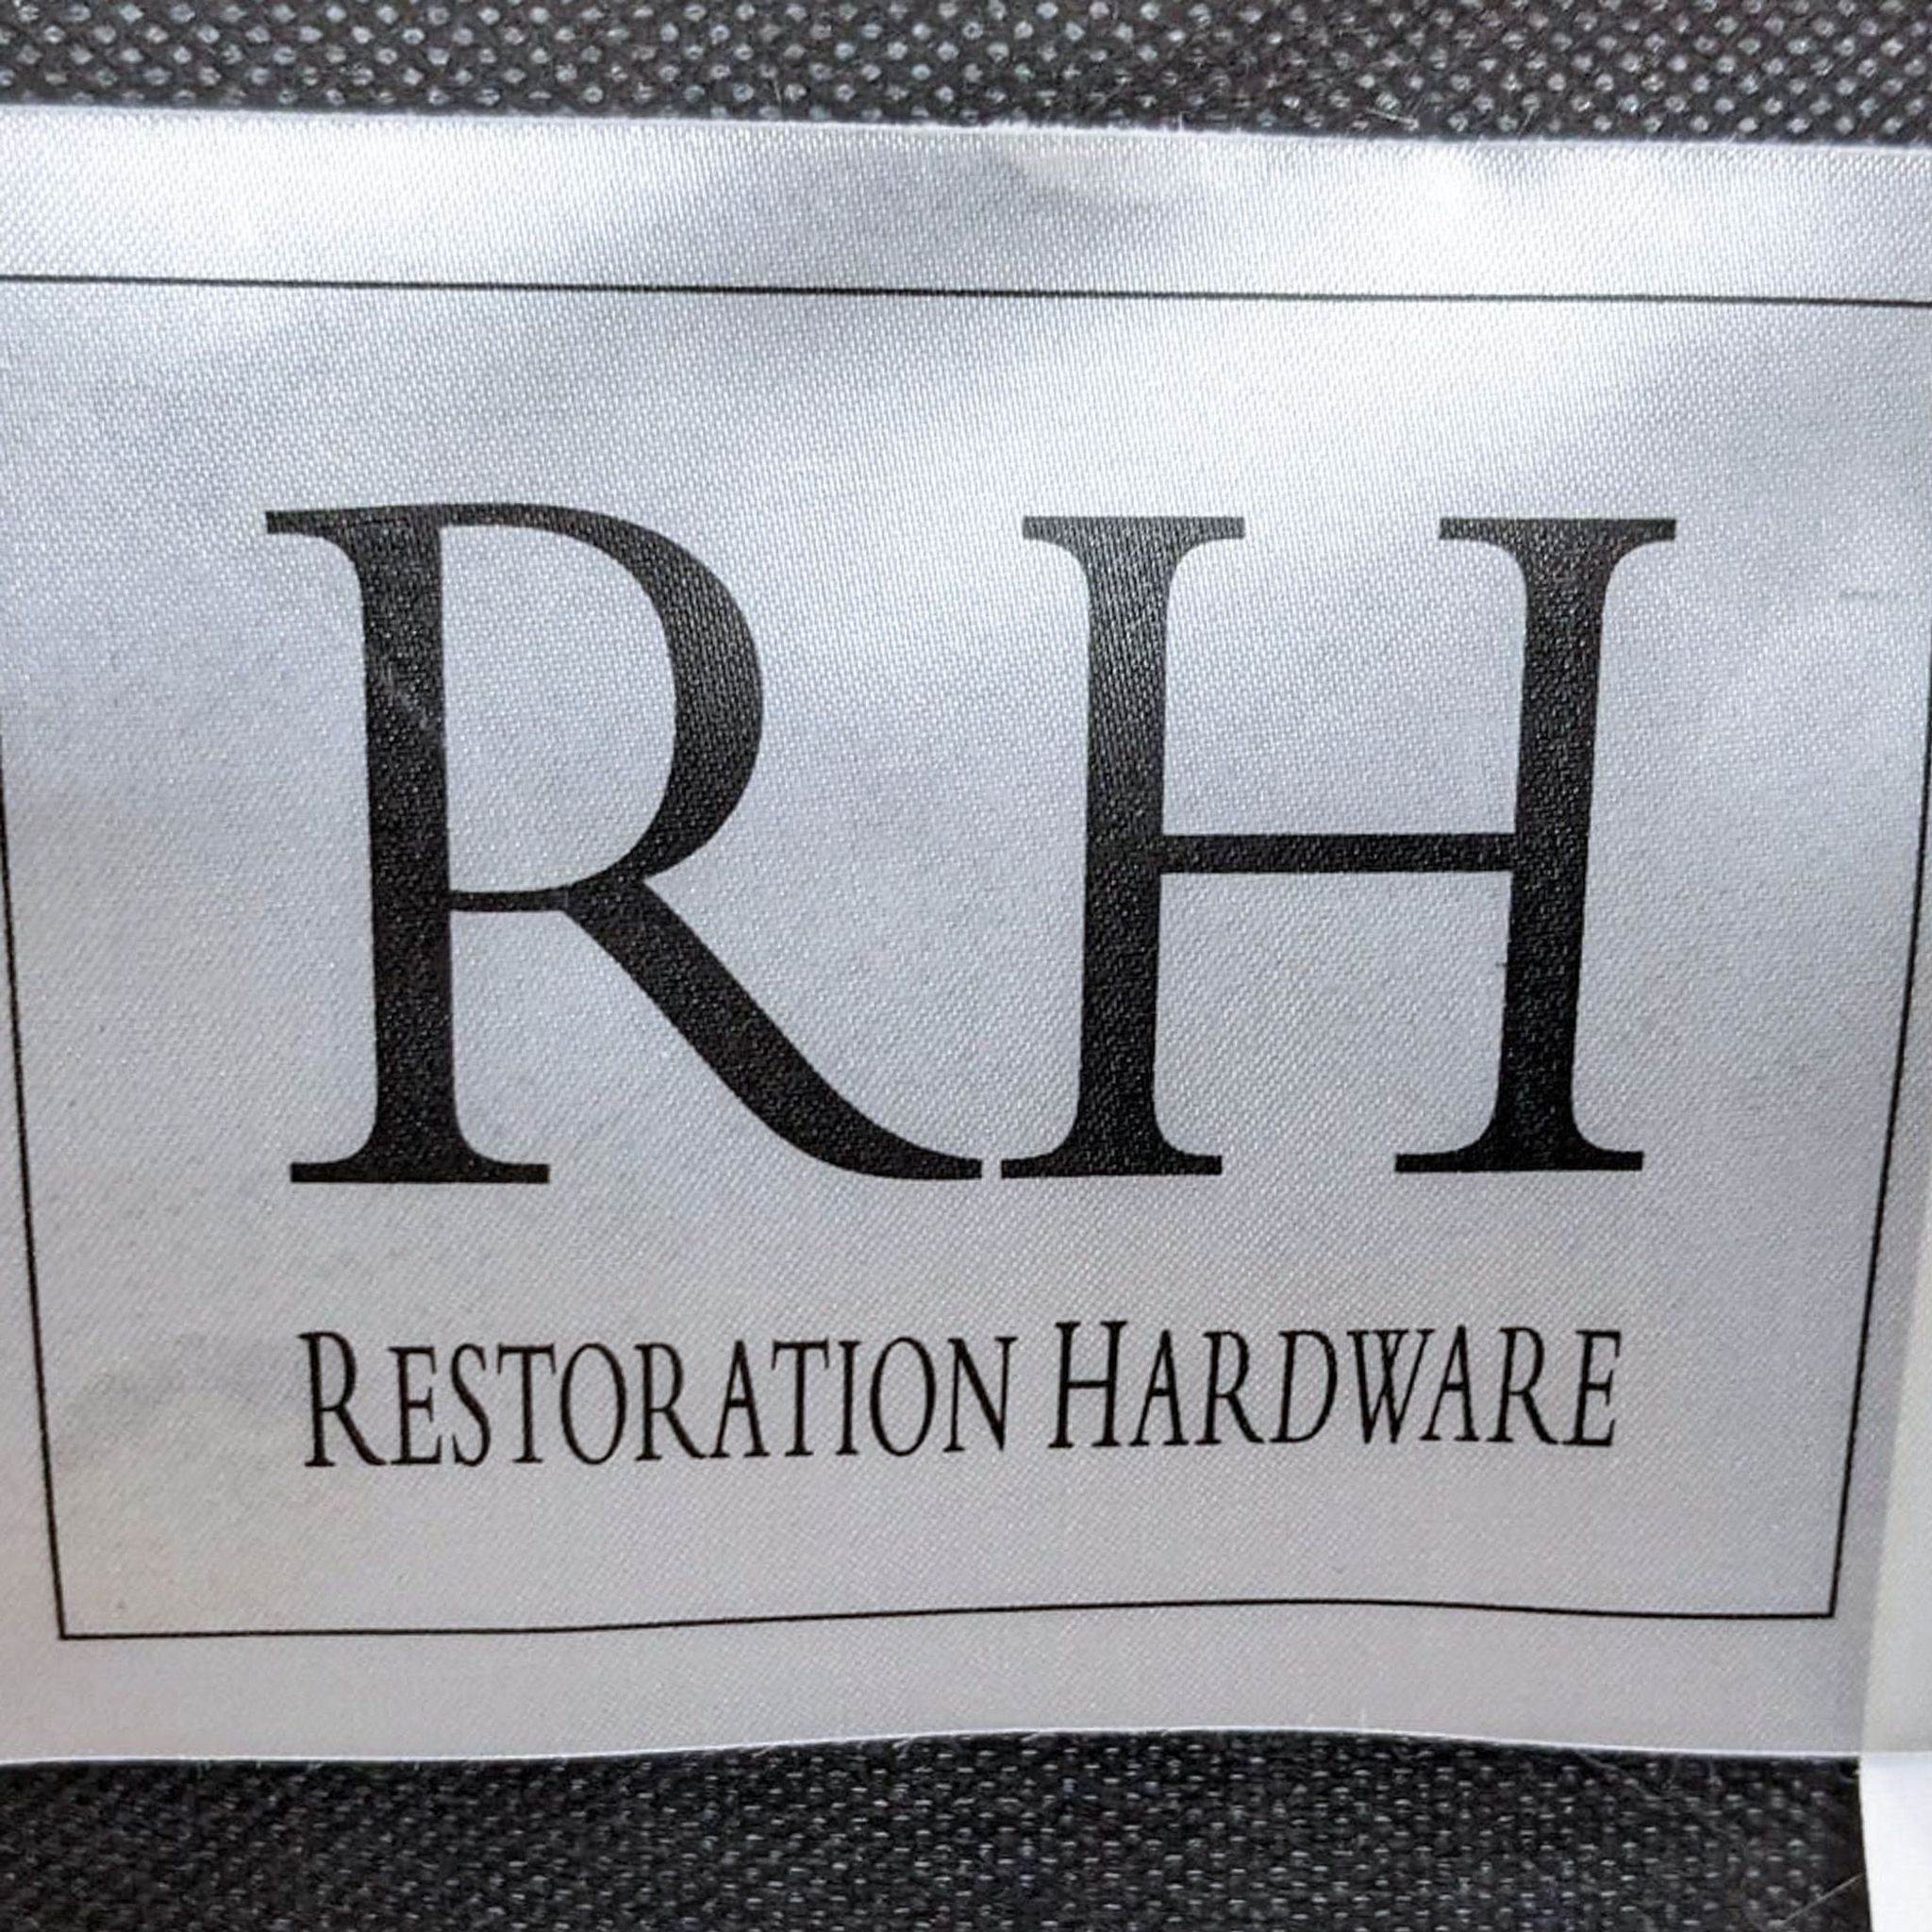 Restoration Hardware brand and information tags for an 8-foot feather down bench seat sofa.